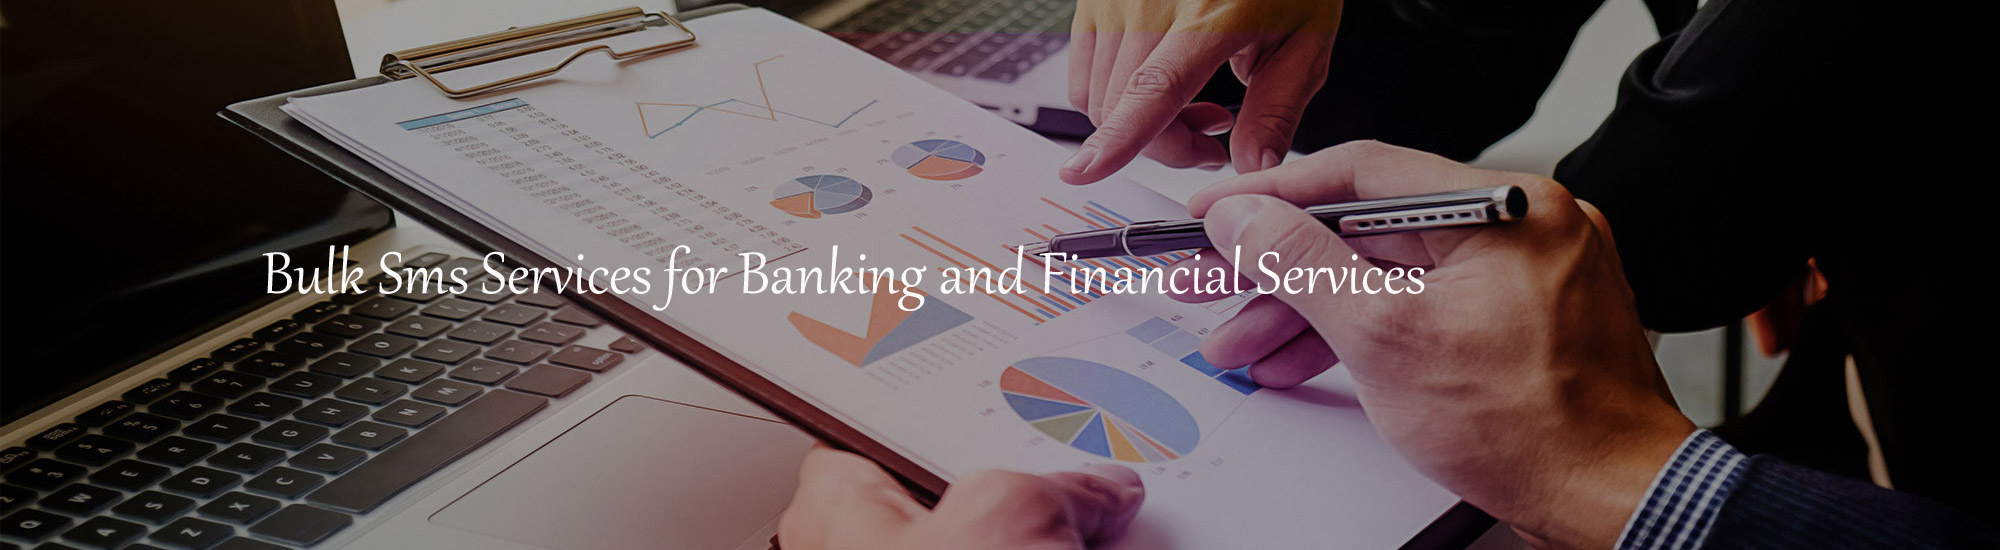 Banking Financial Services